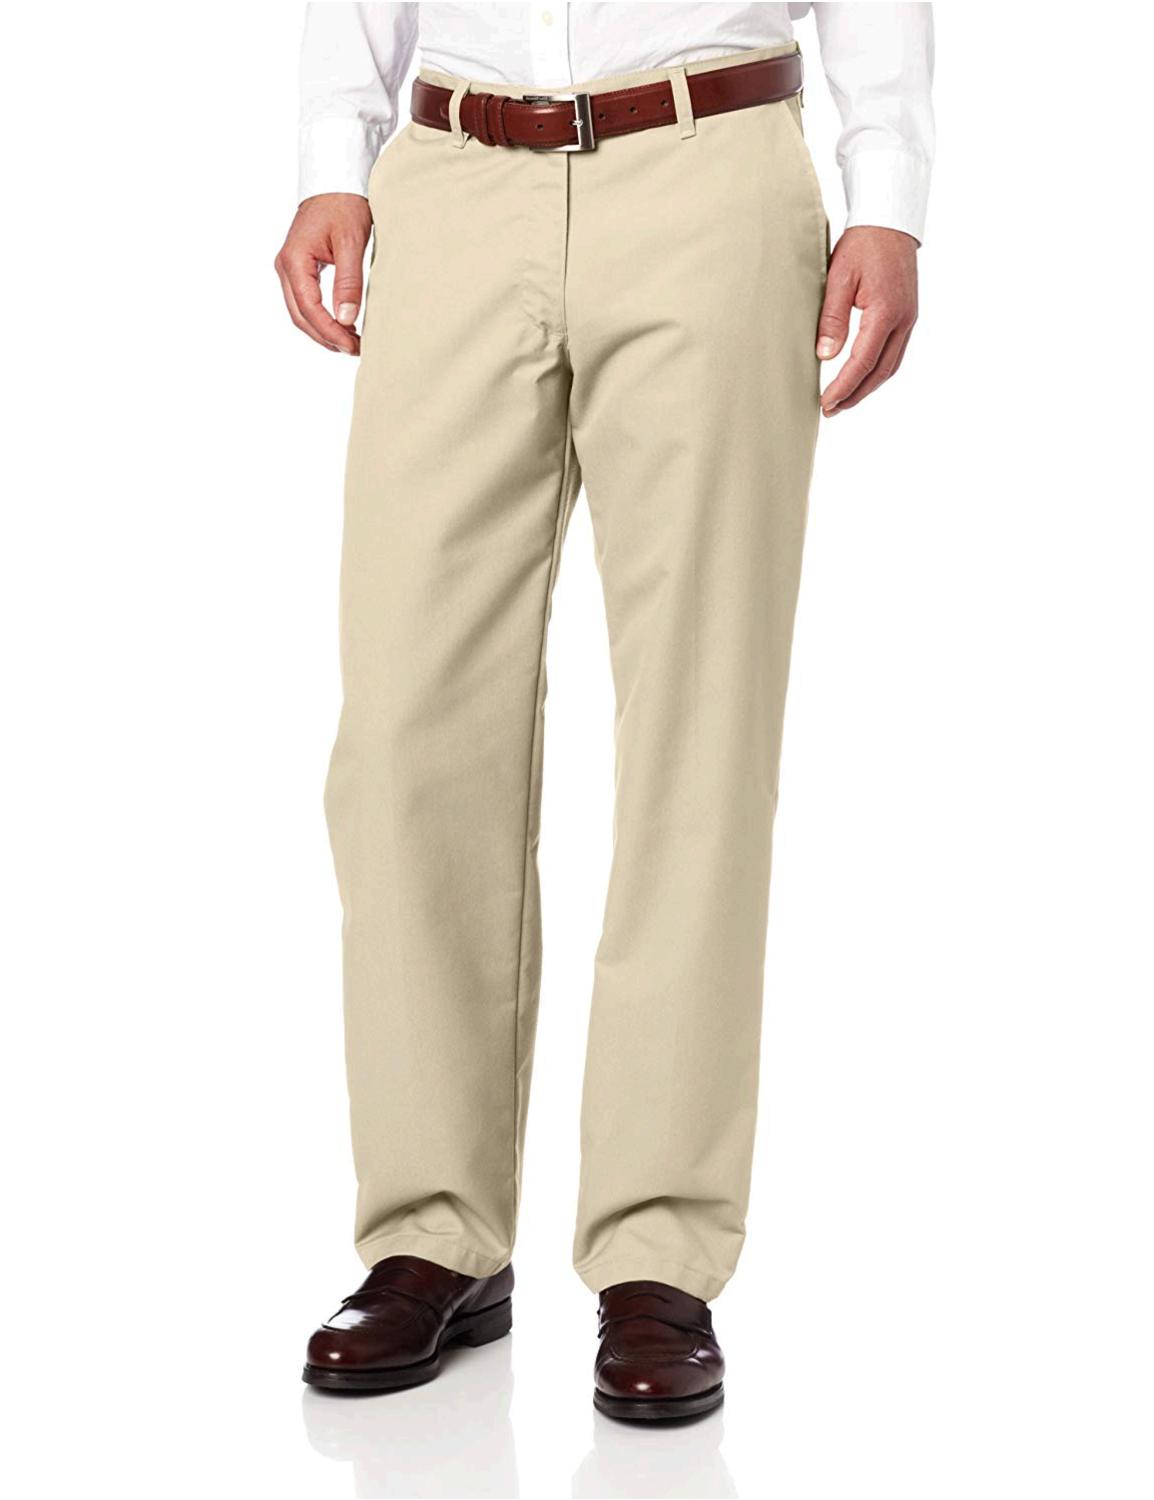 Lee Men's Total Freedom Relaxed Fit Flat Front Pant - 36W, Sand, Size ...